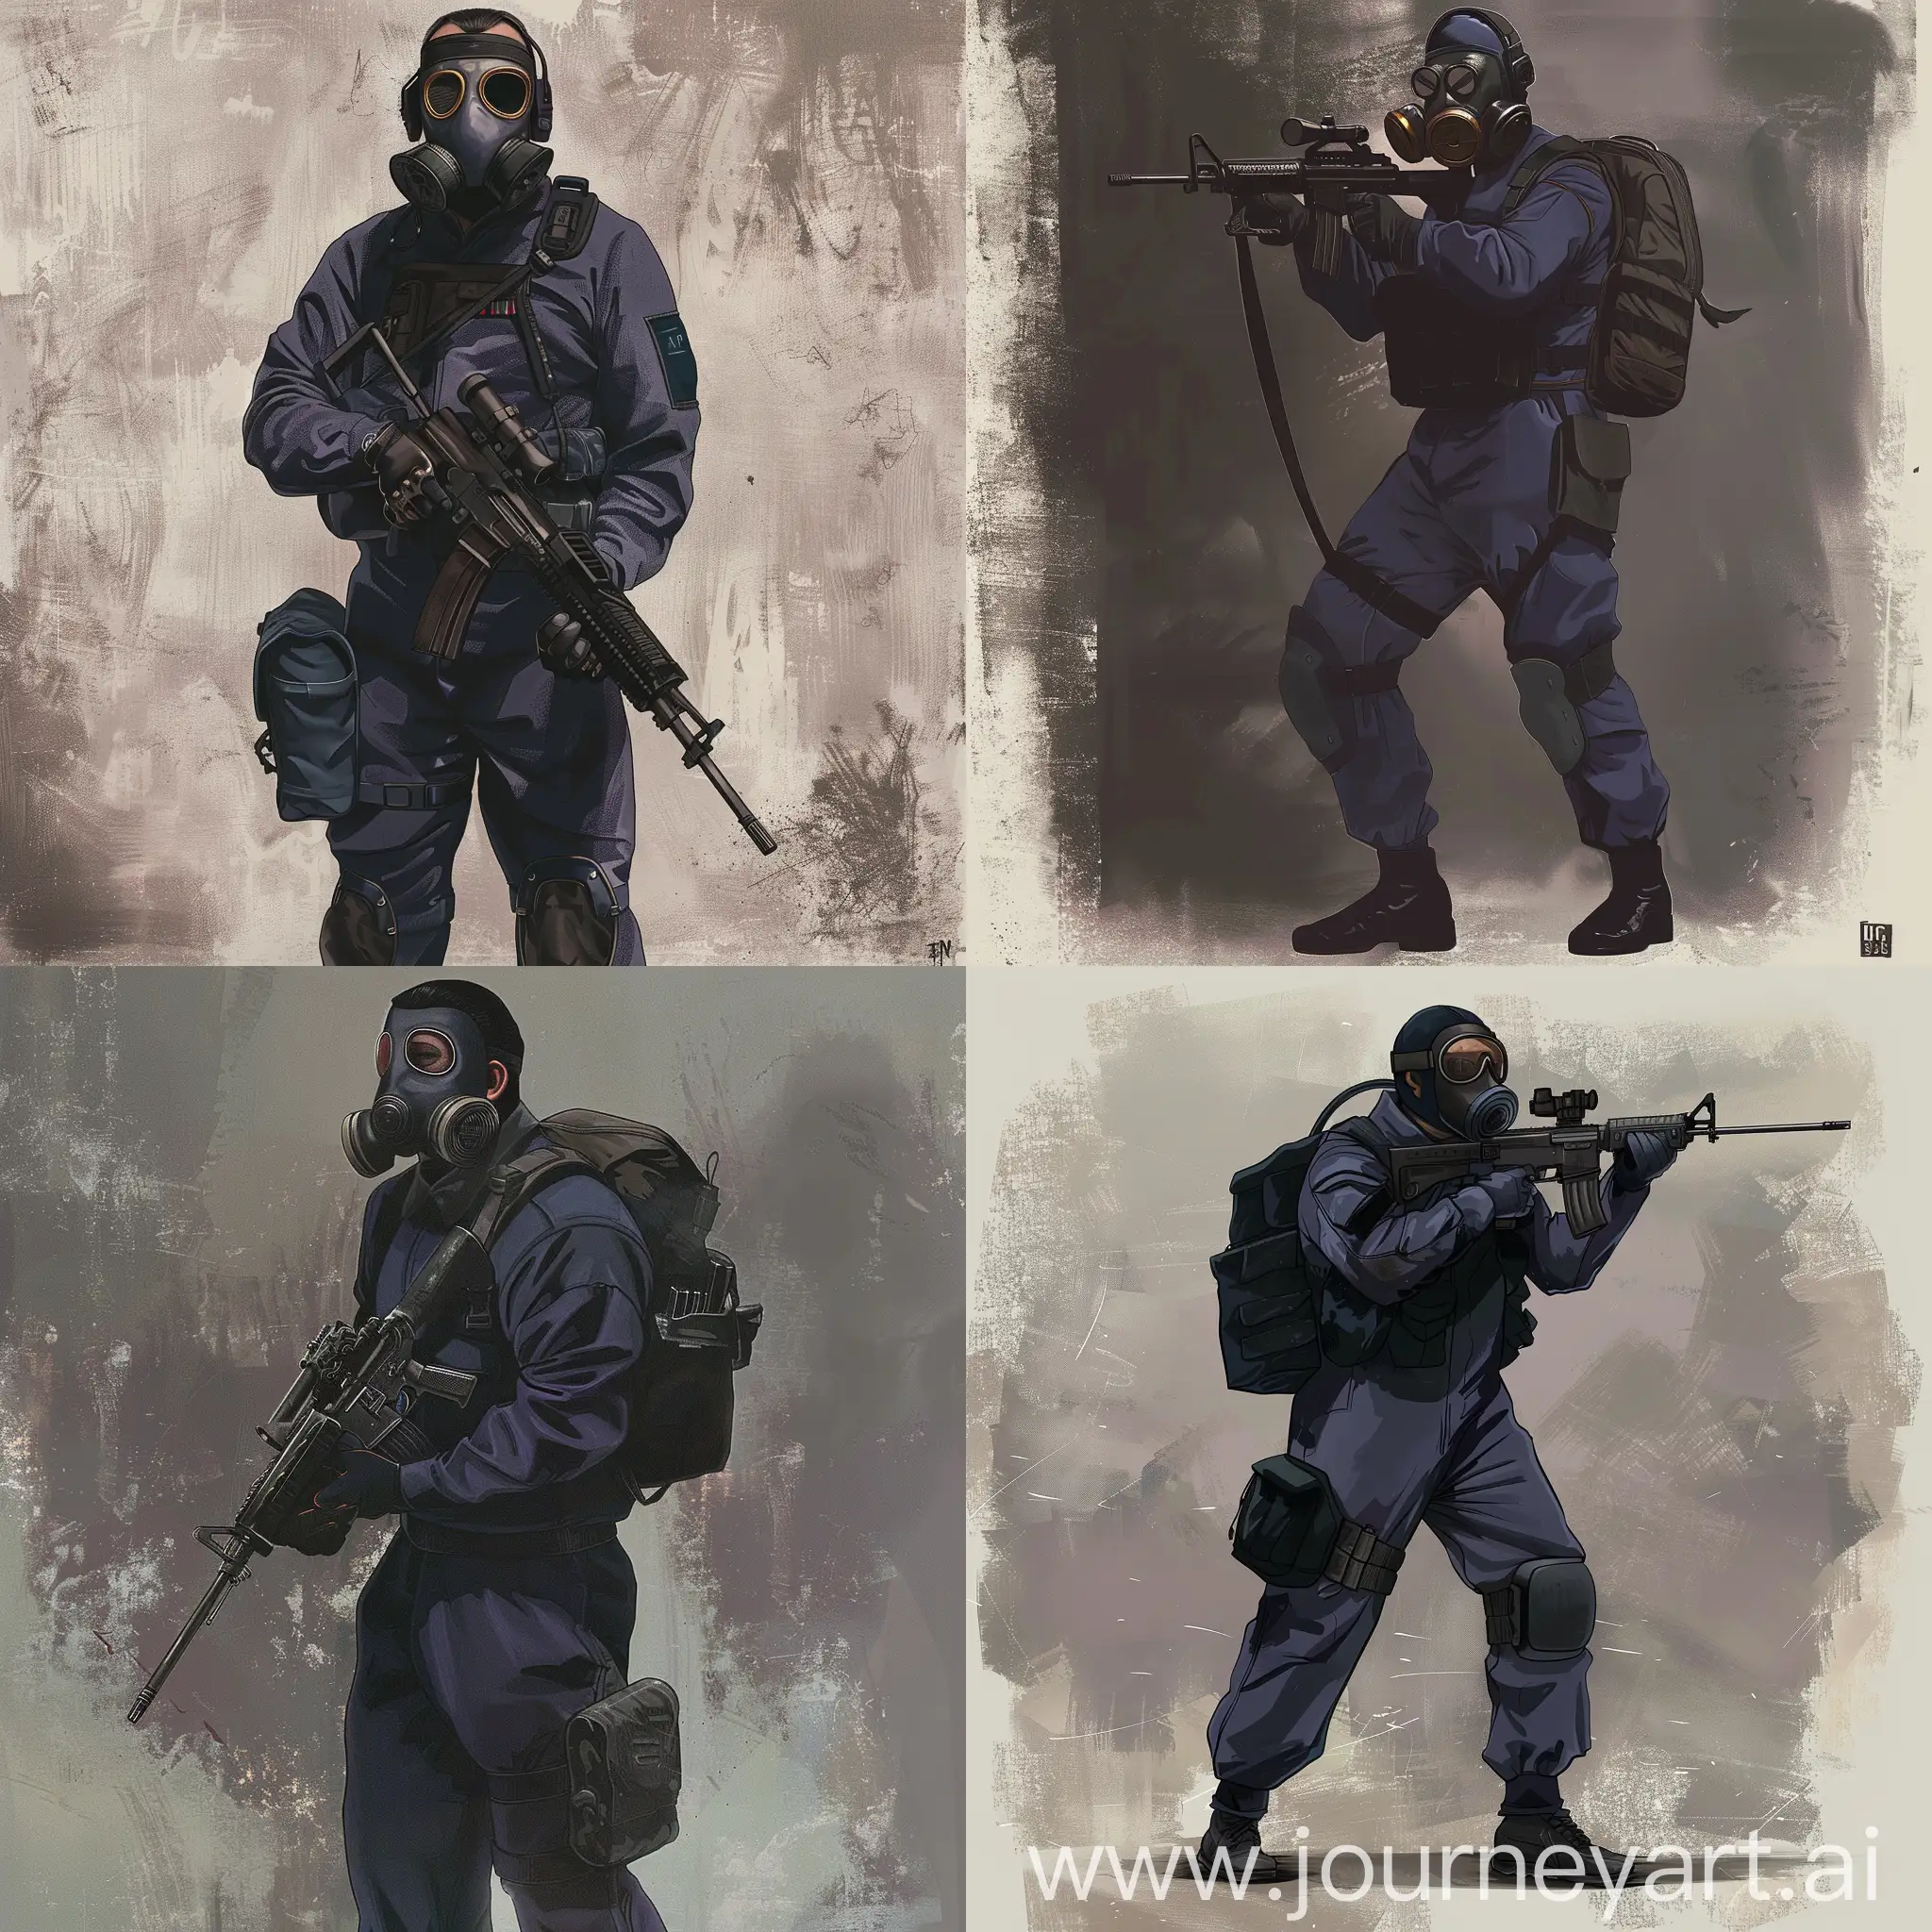 Concept art, 1978 year, SAS operator, dark purple military jumpsuit, hazmat protective gasmask on his face, small military backpack, military unloading on his body, sniper rifle in his hands.